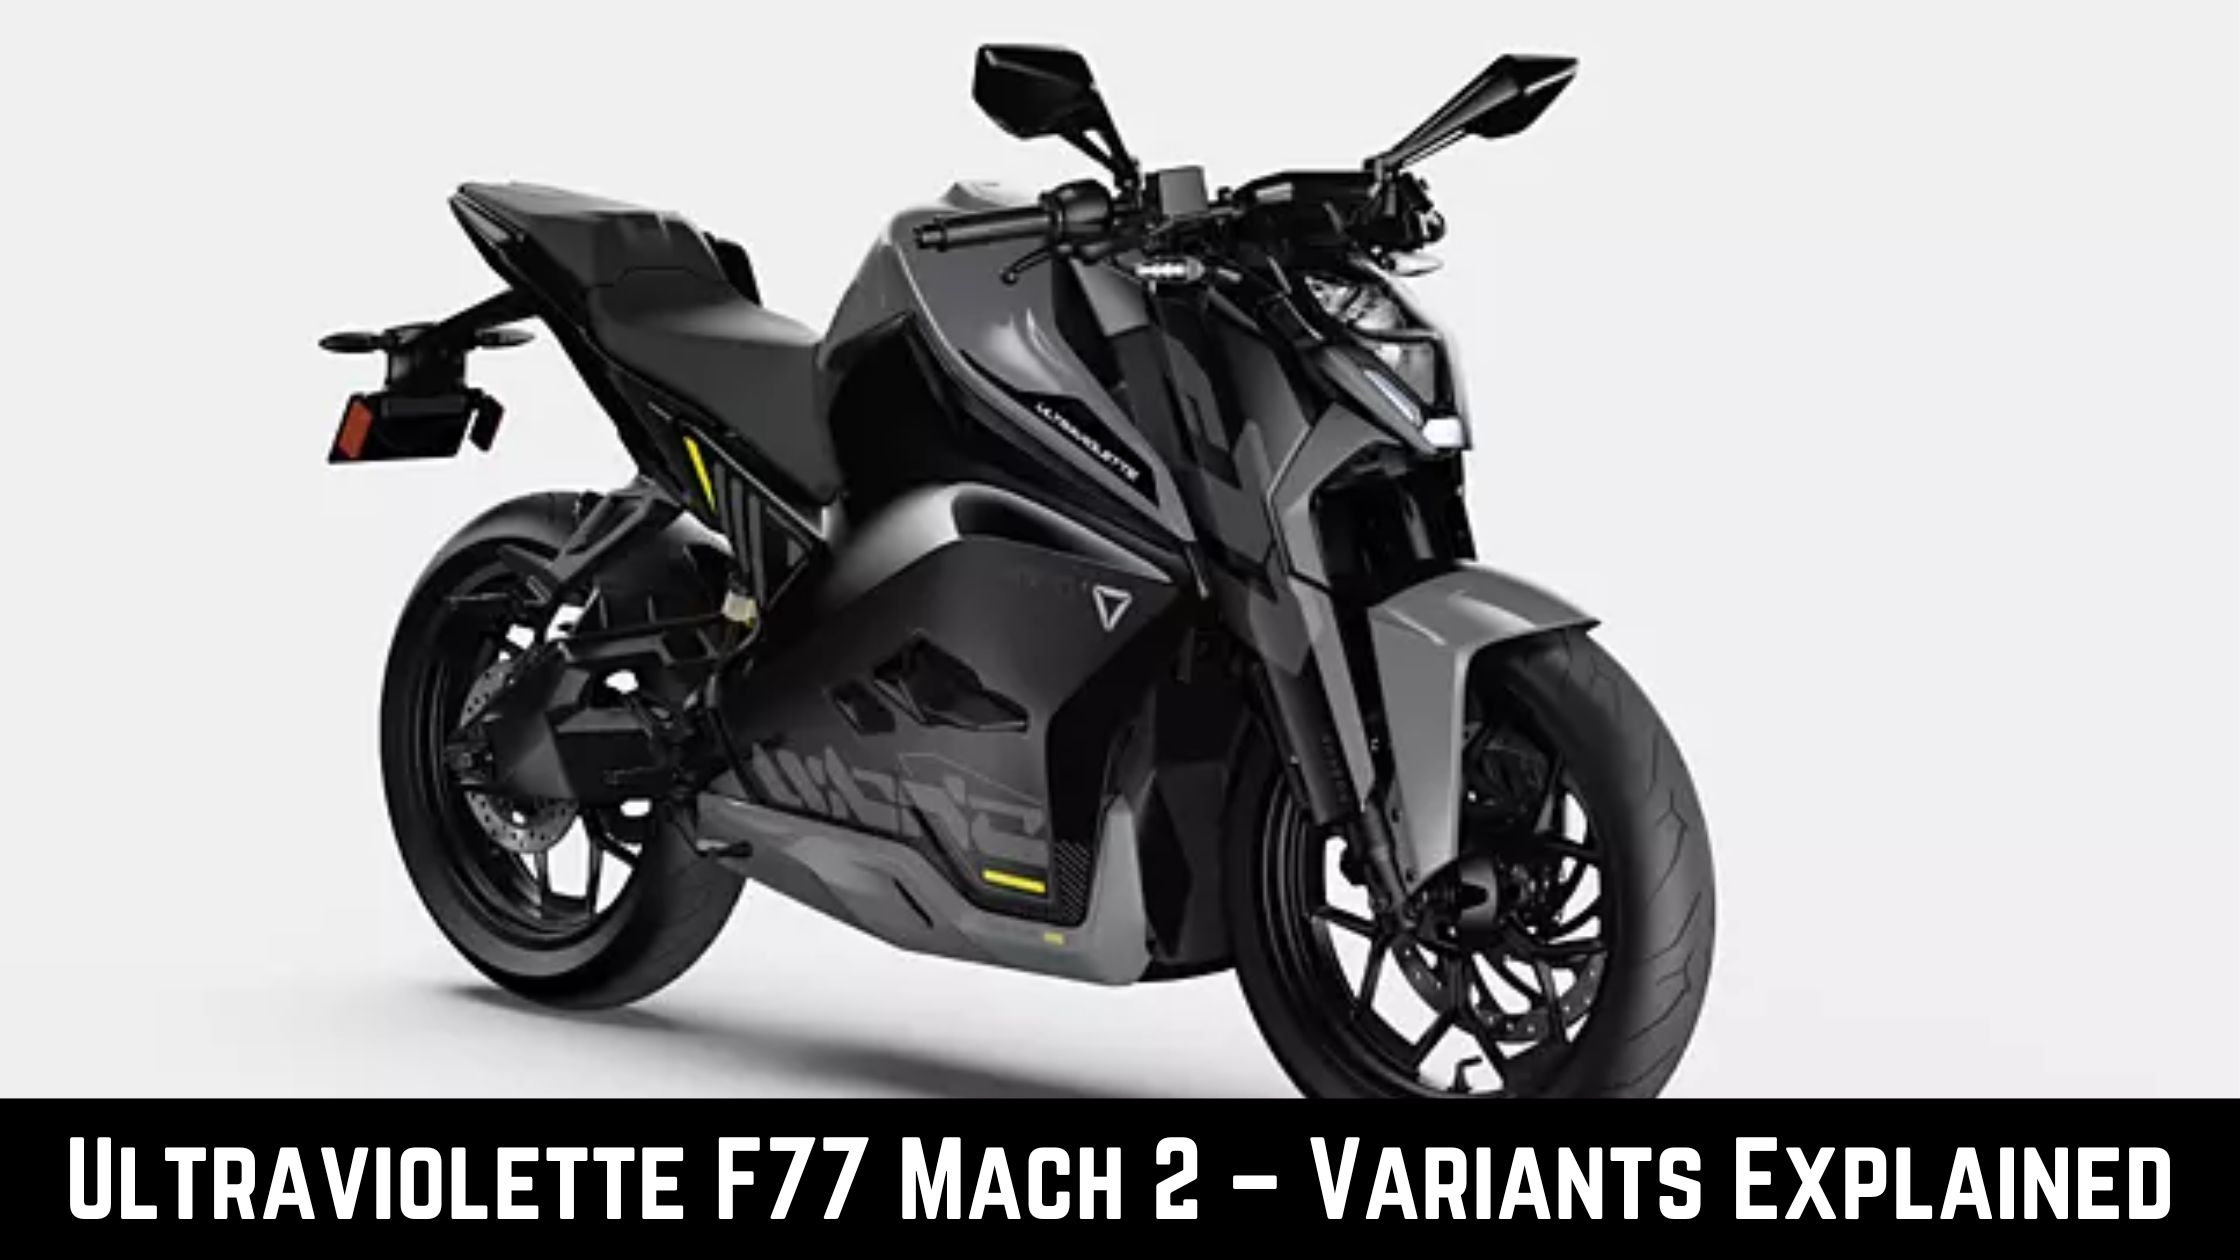 Ultraviolette F77 Mach 2 – Variants Explained